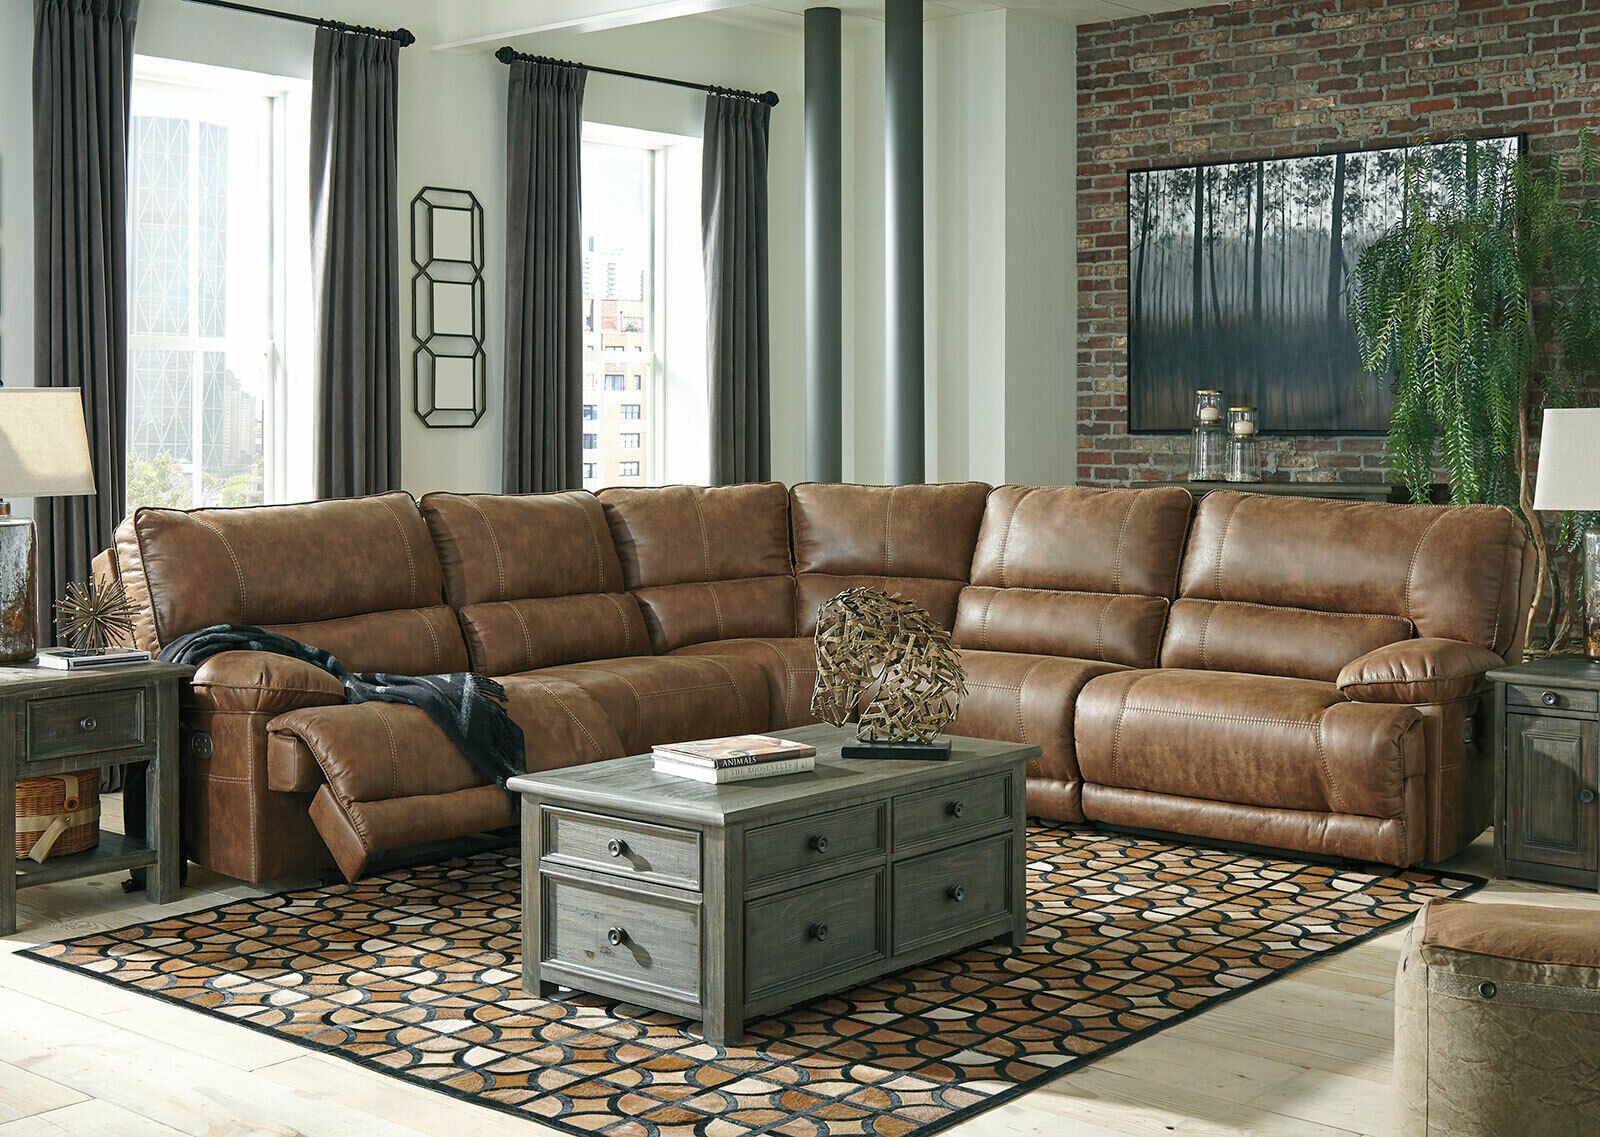 Faux Leather Reclining Couches – Damiano Faux Leather Reclining Sofa With Faux Leather Sofas In Dark Brown (View 10 of 20)